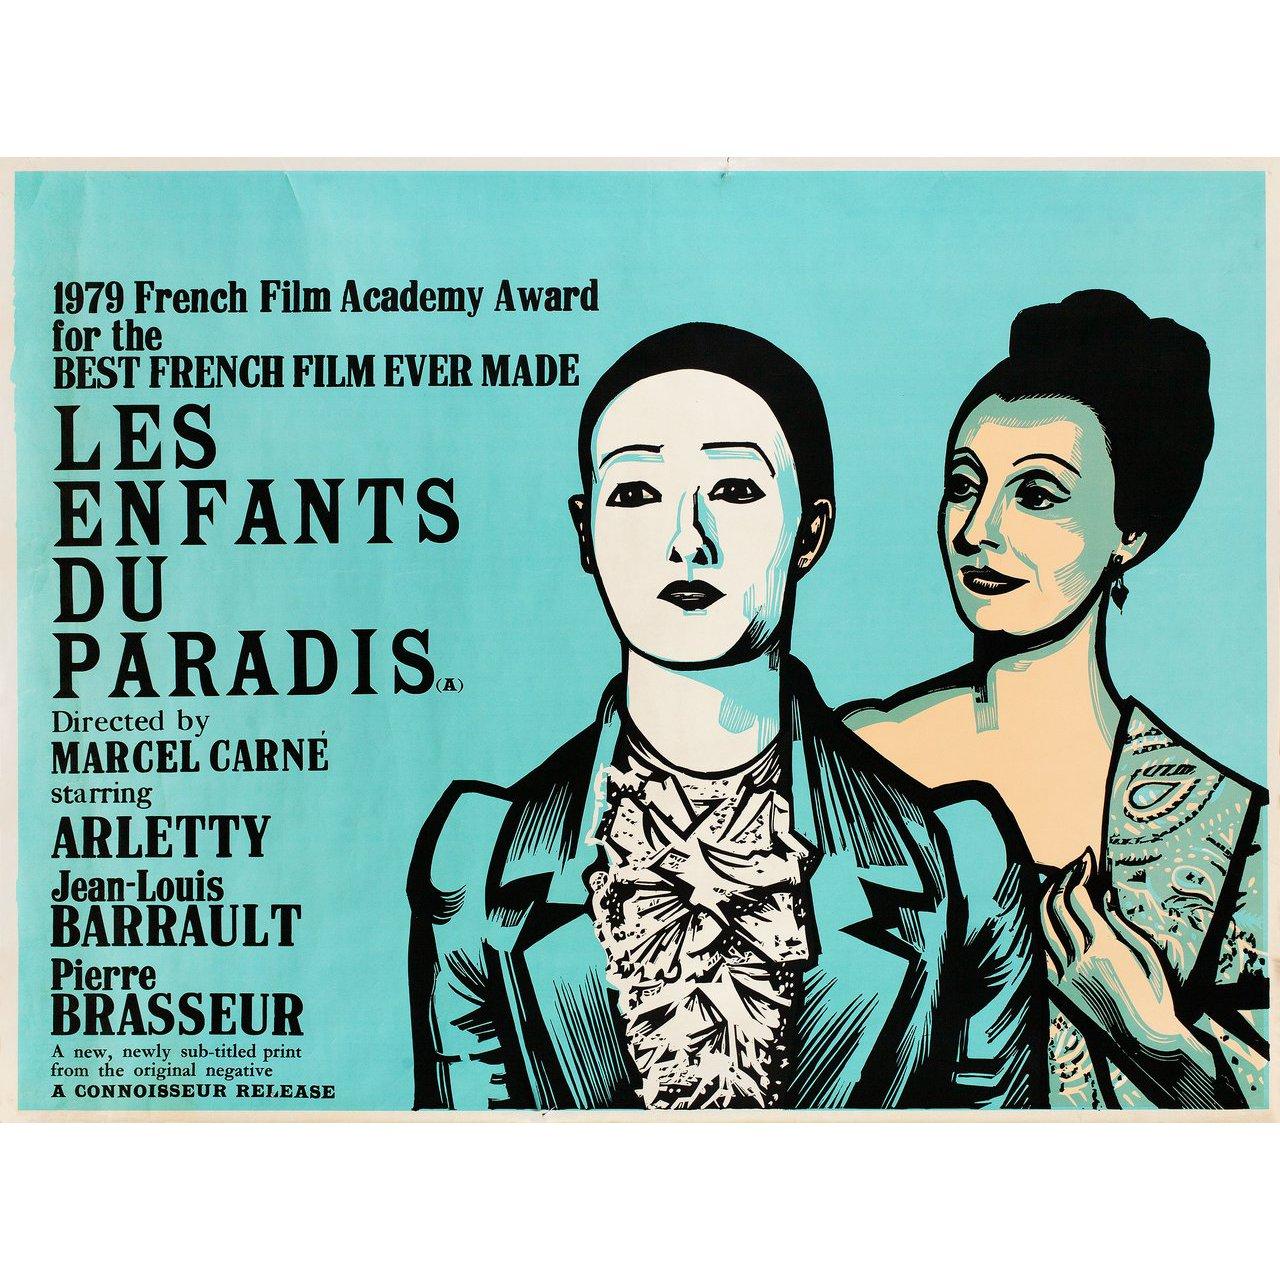 Original 1970s re-release British quad poster by Peter Strausfeld for the 1945 film Les Enfants du Paradis (Children of Paradise) directed by Marcel Carne with Arletty / Jean-Louis Barrault / Pierre Brasseur / Pierre Renoir. Very Good-Fine